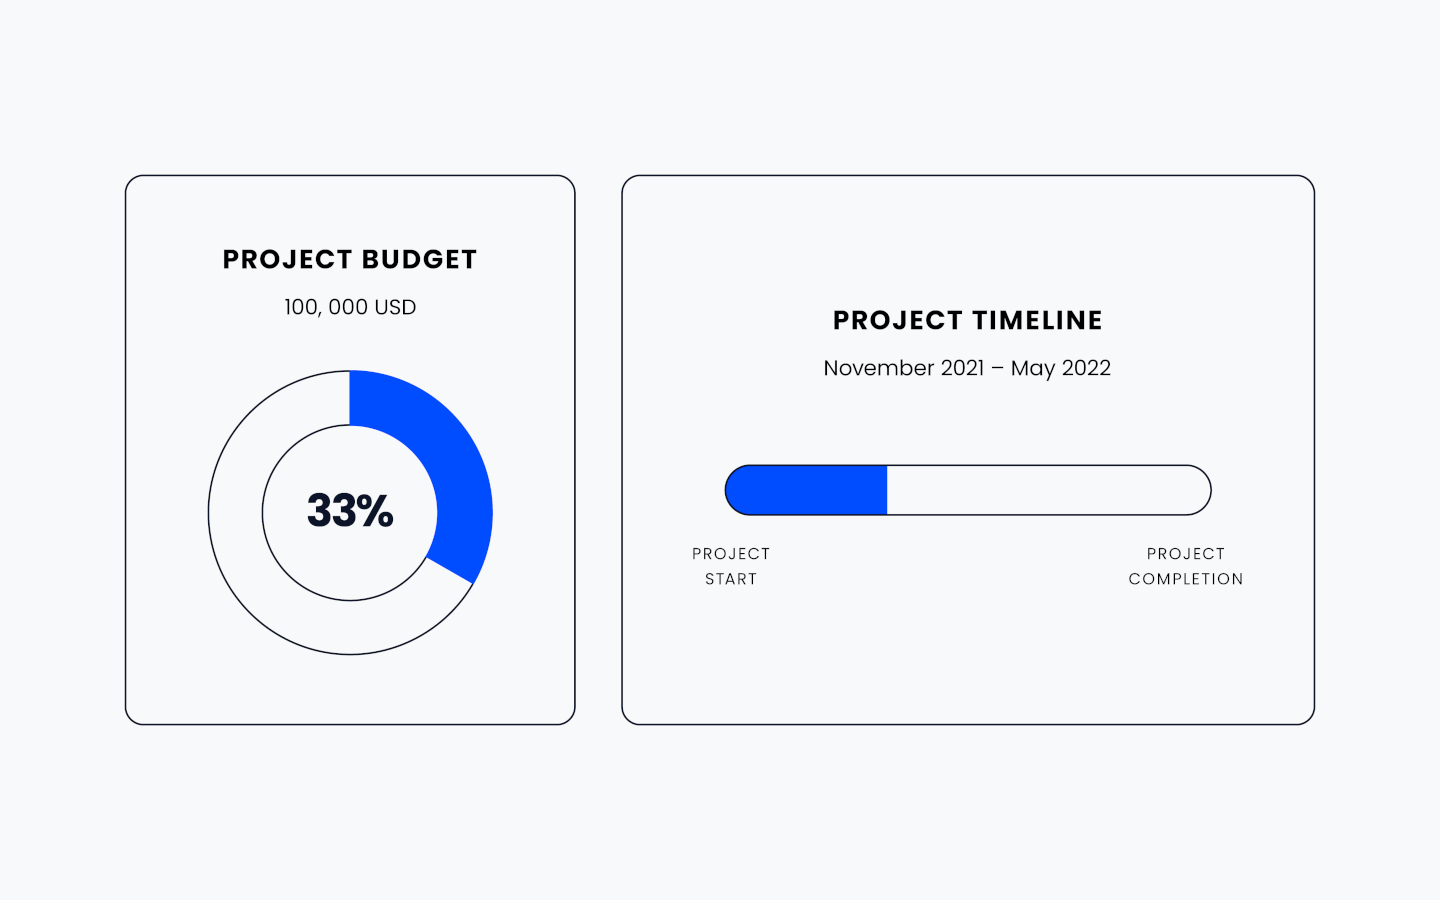 project budget pie chart and project timeline bar chart showing 33% project progress